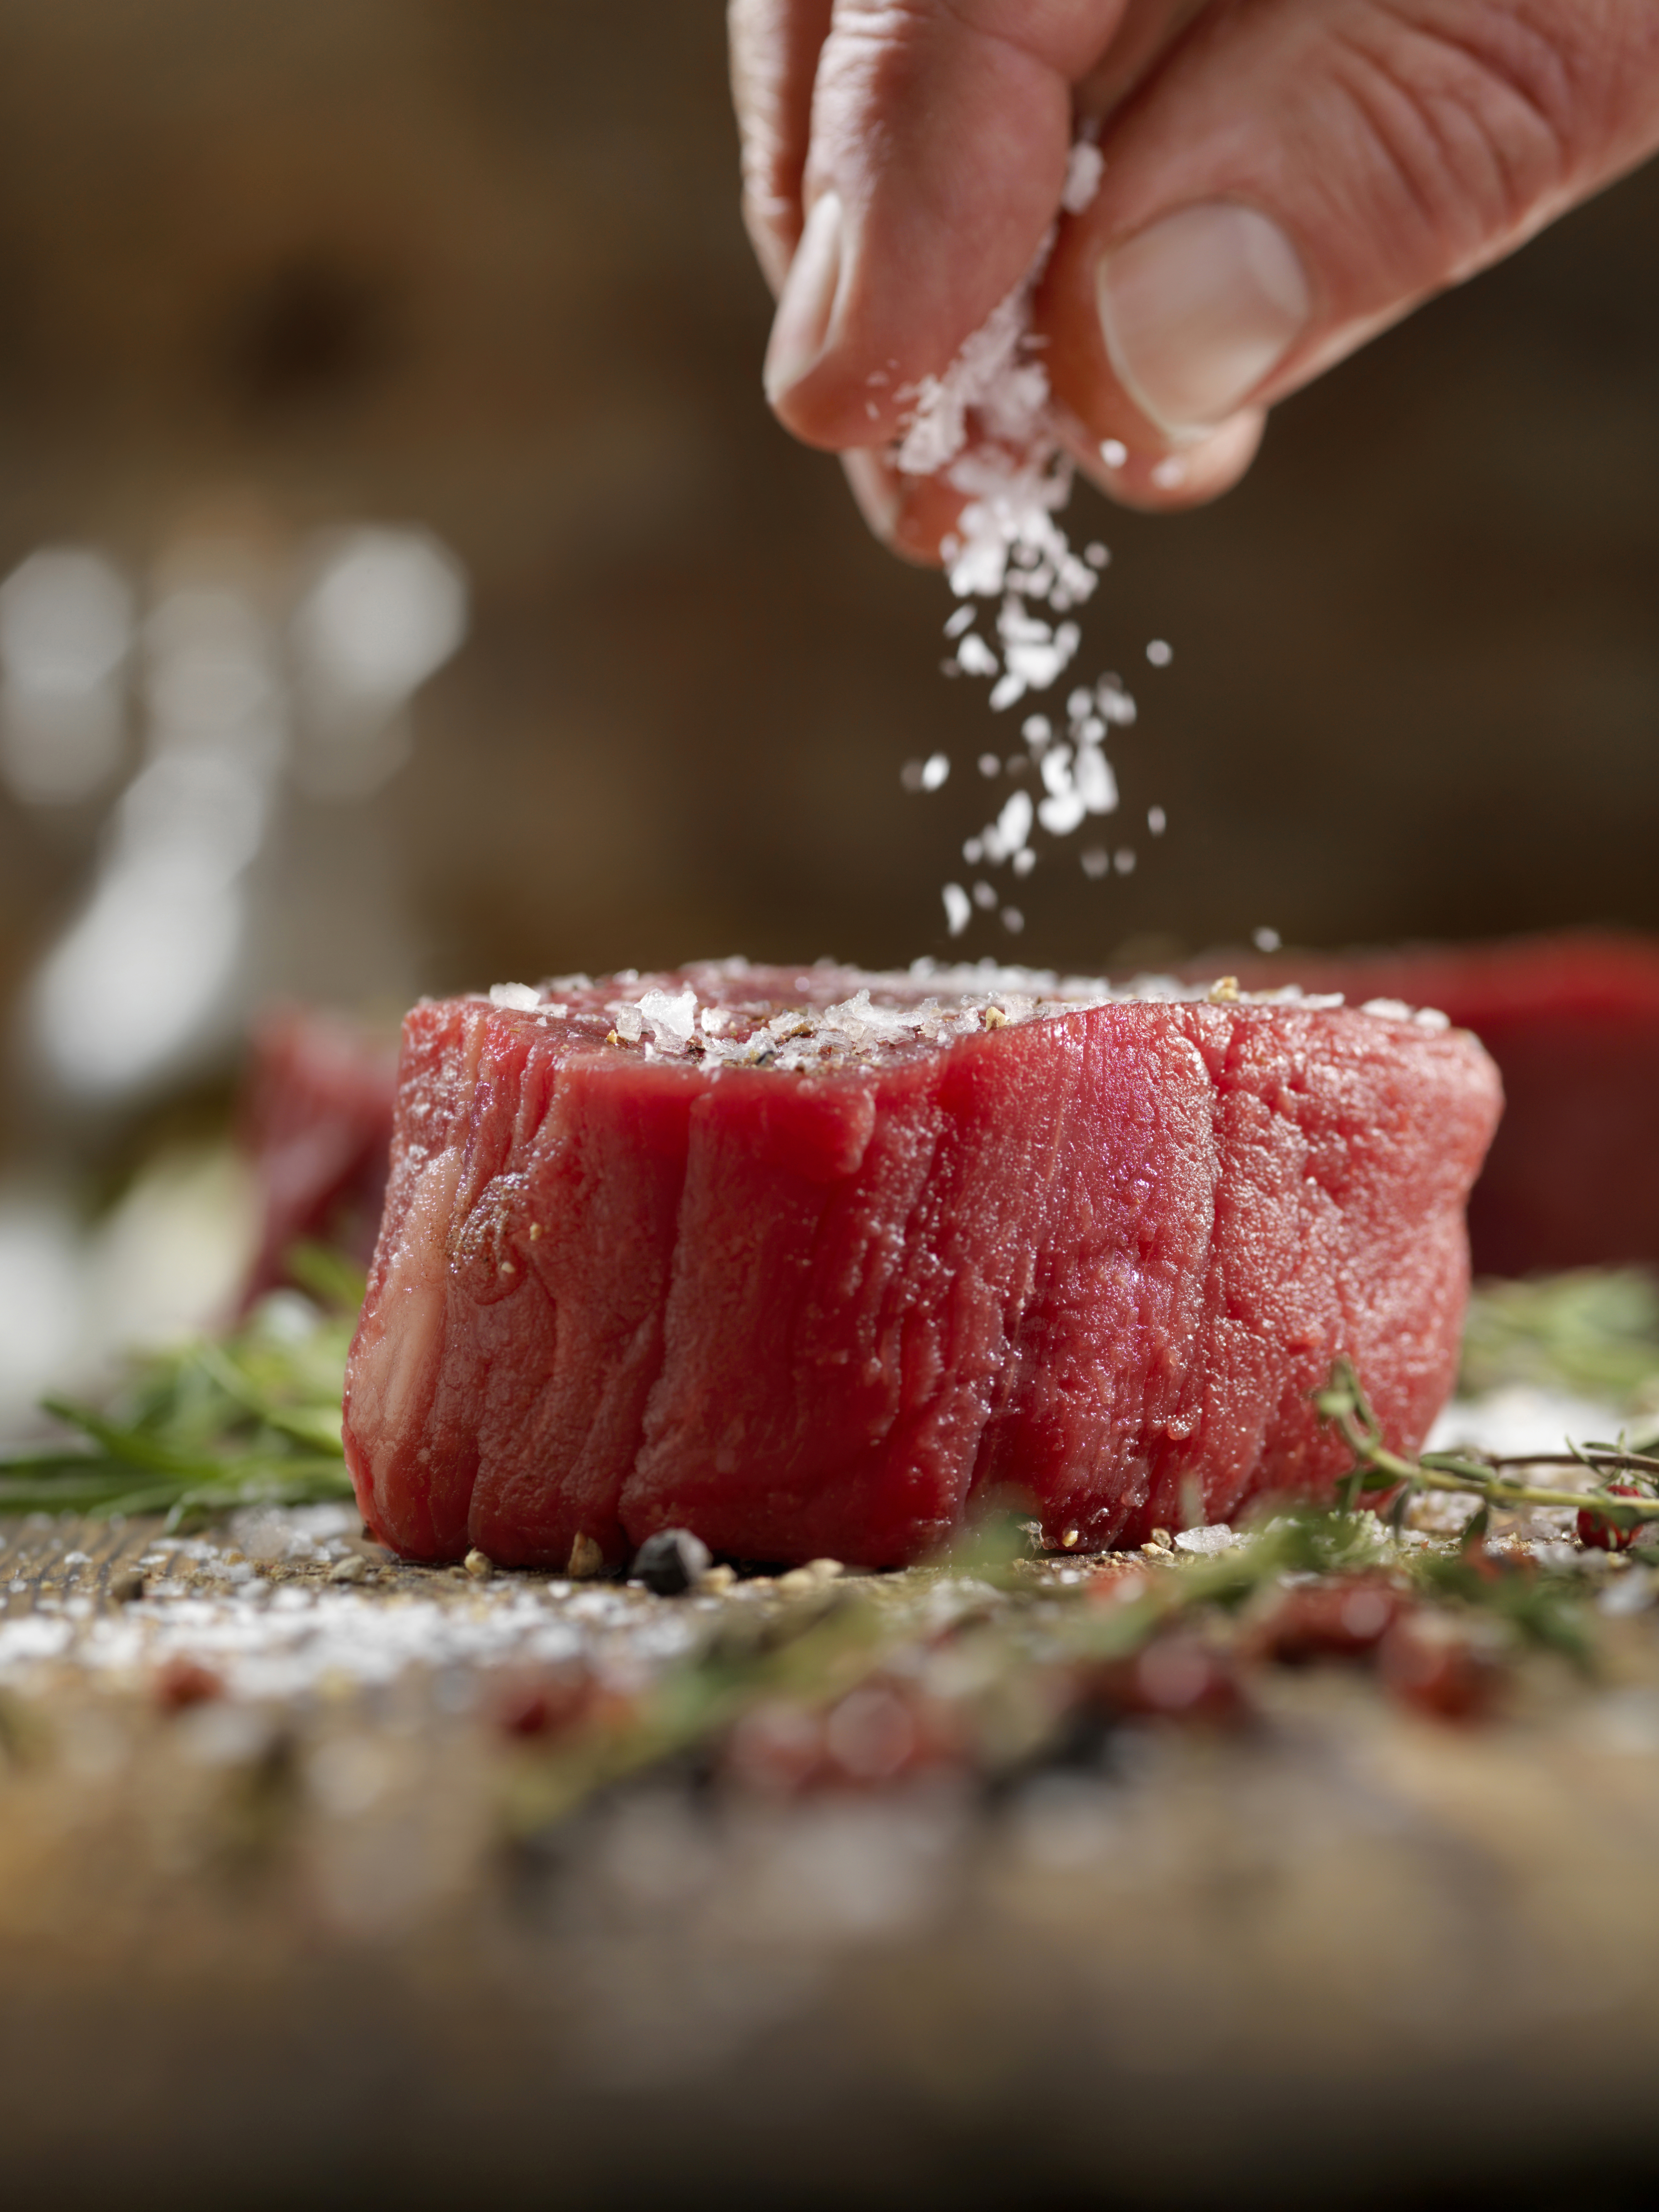 Hand seasoning a raw steak with salt on a wooden surface, surrounded by herbs